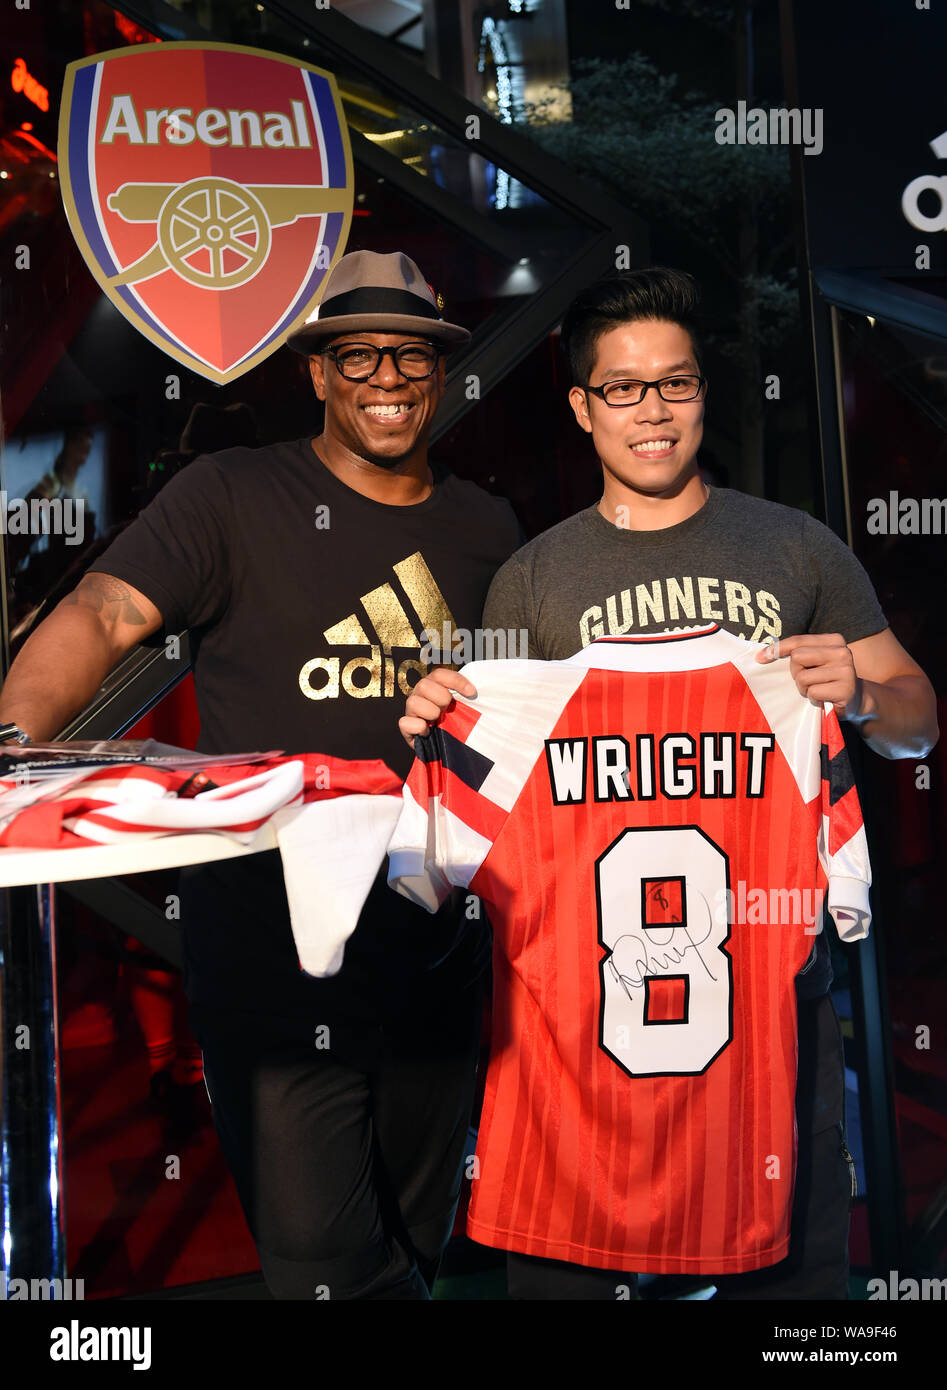 Former English football player Ian Wright attends a promotional event for  new team jersey of Arsenal F.C. of English football league system at a  sport Stock Photo - Alamy